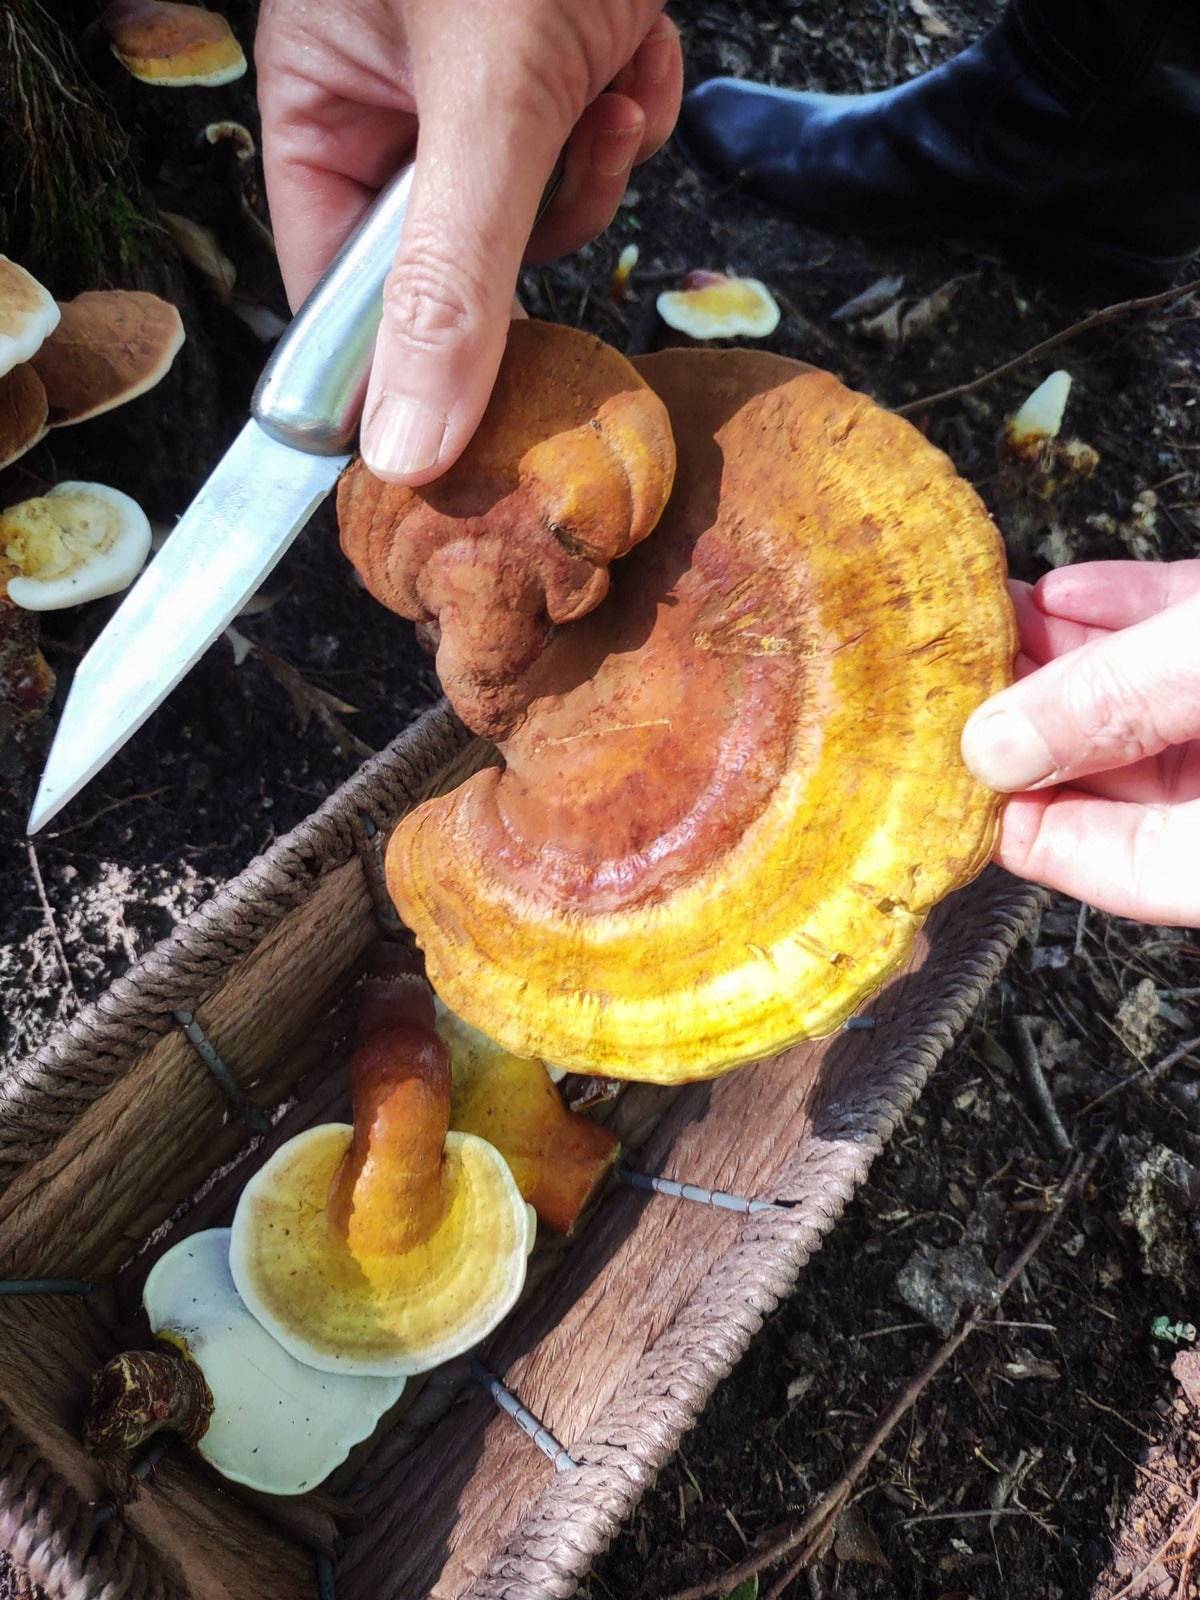 GOLDEN REISHI MUSHROOM - DRIED - HARVESTED FROM OUR LAND - Cold Creek Natural Farm